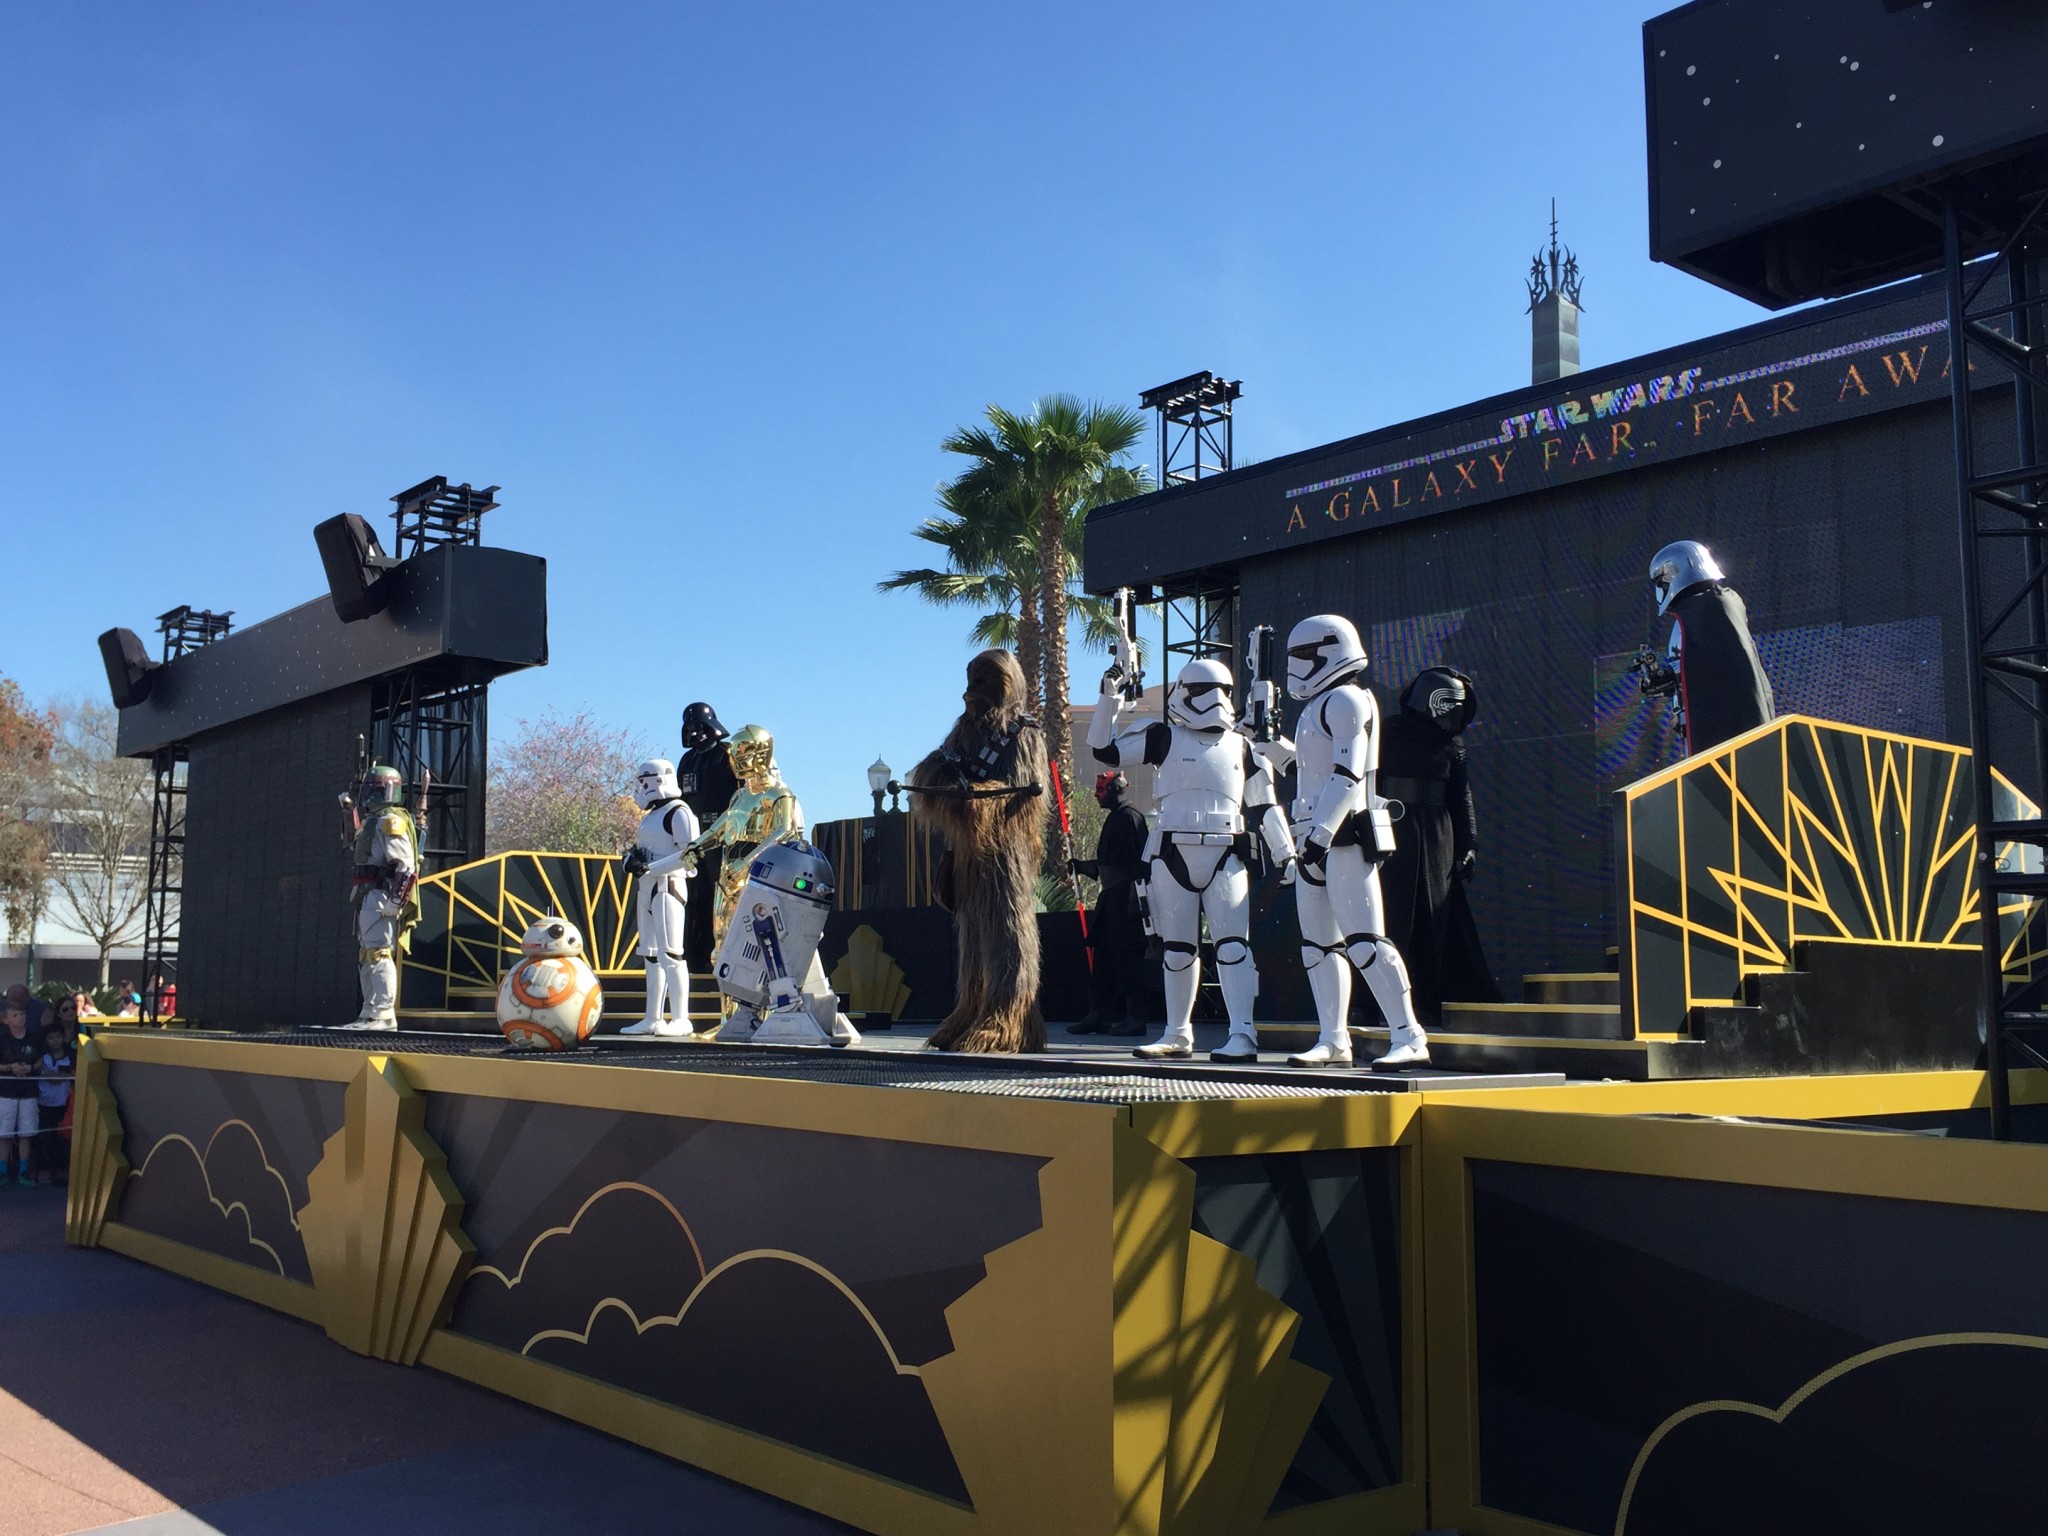 A Look Into the New Star Wars: A Galaxy Far, Far Away Stage Show – Now Showing!